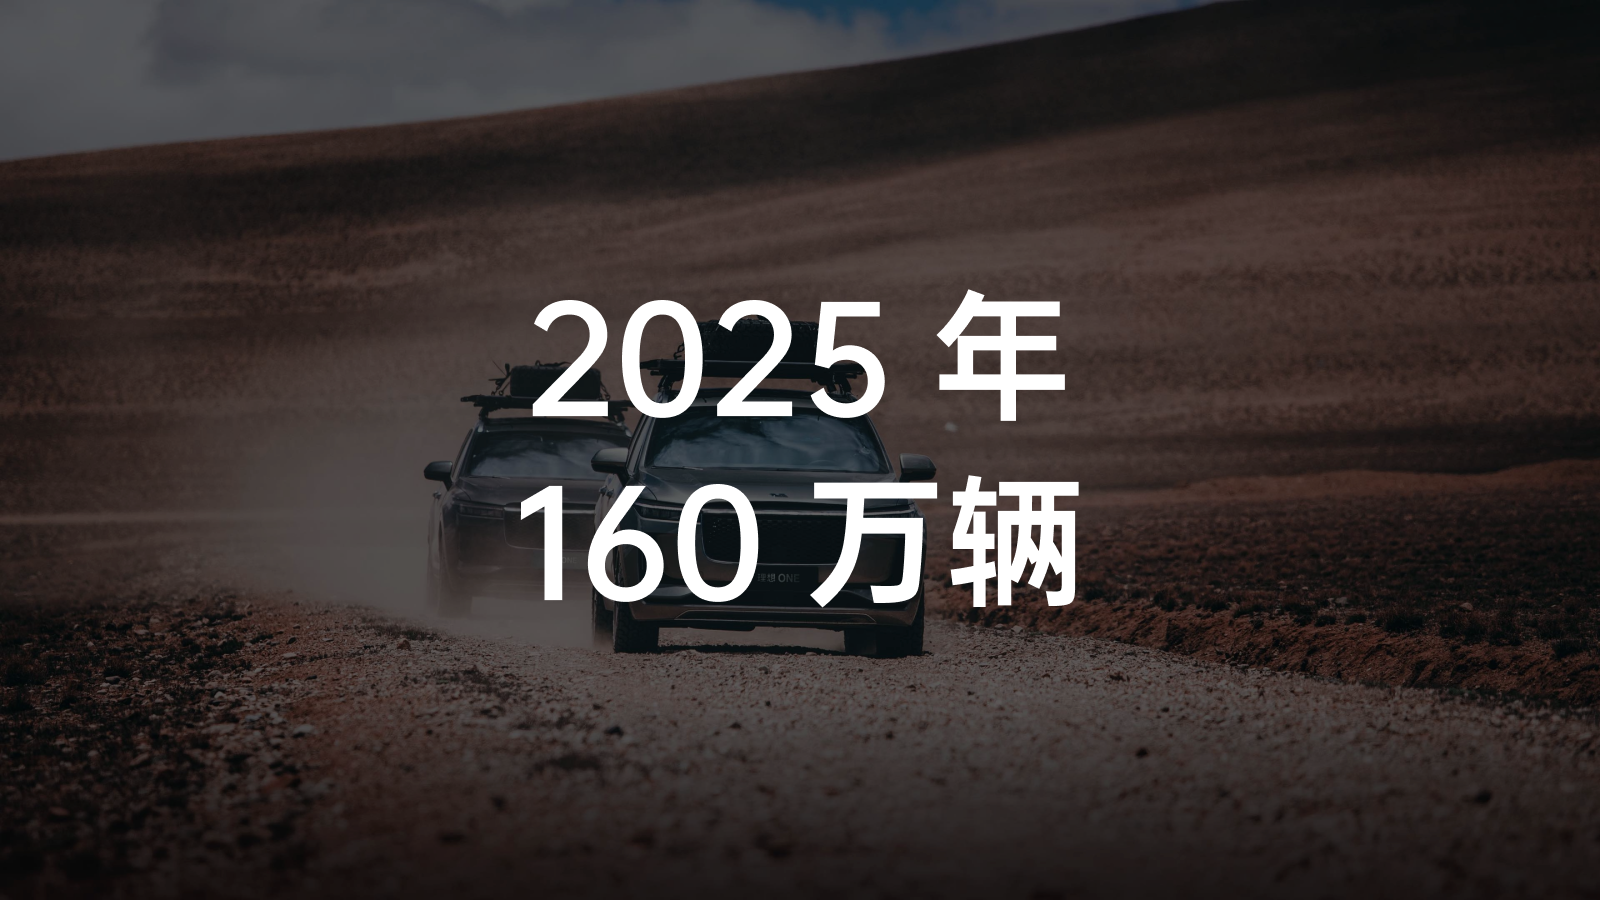 Exclusive | Ideal Internal Memo: By 2025, achieving 20% market share and becoming the leading Chinese smart electric vehicle company (Full text of internal memo attached)